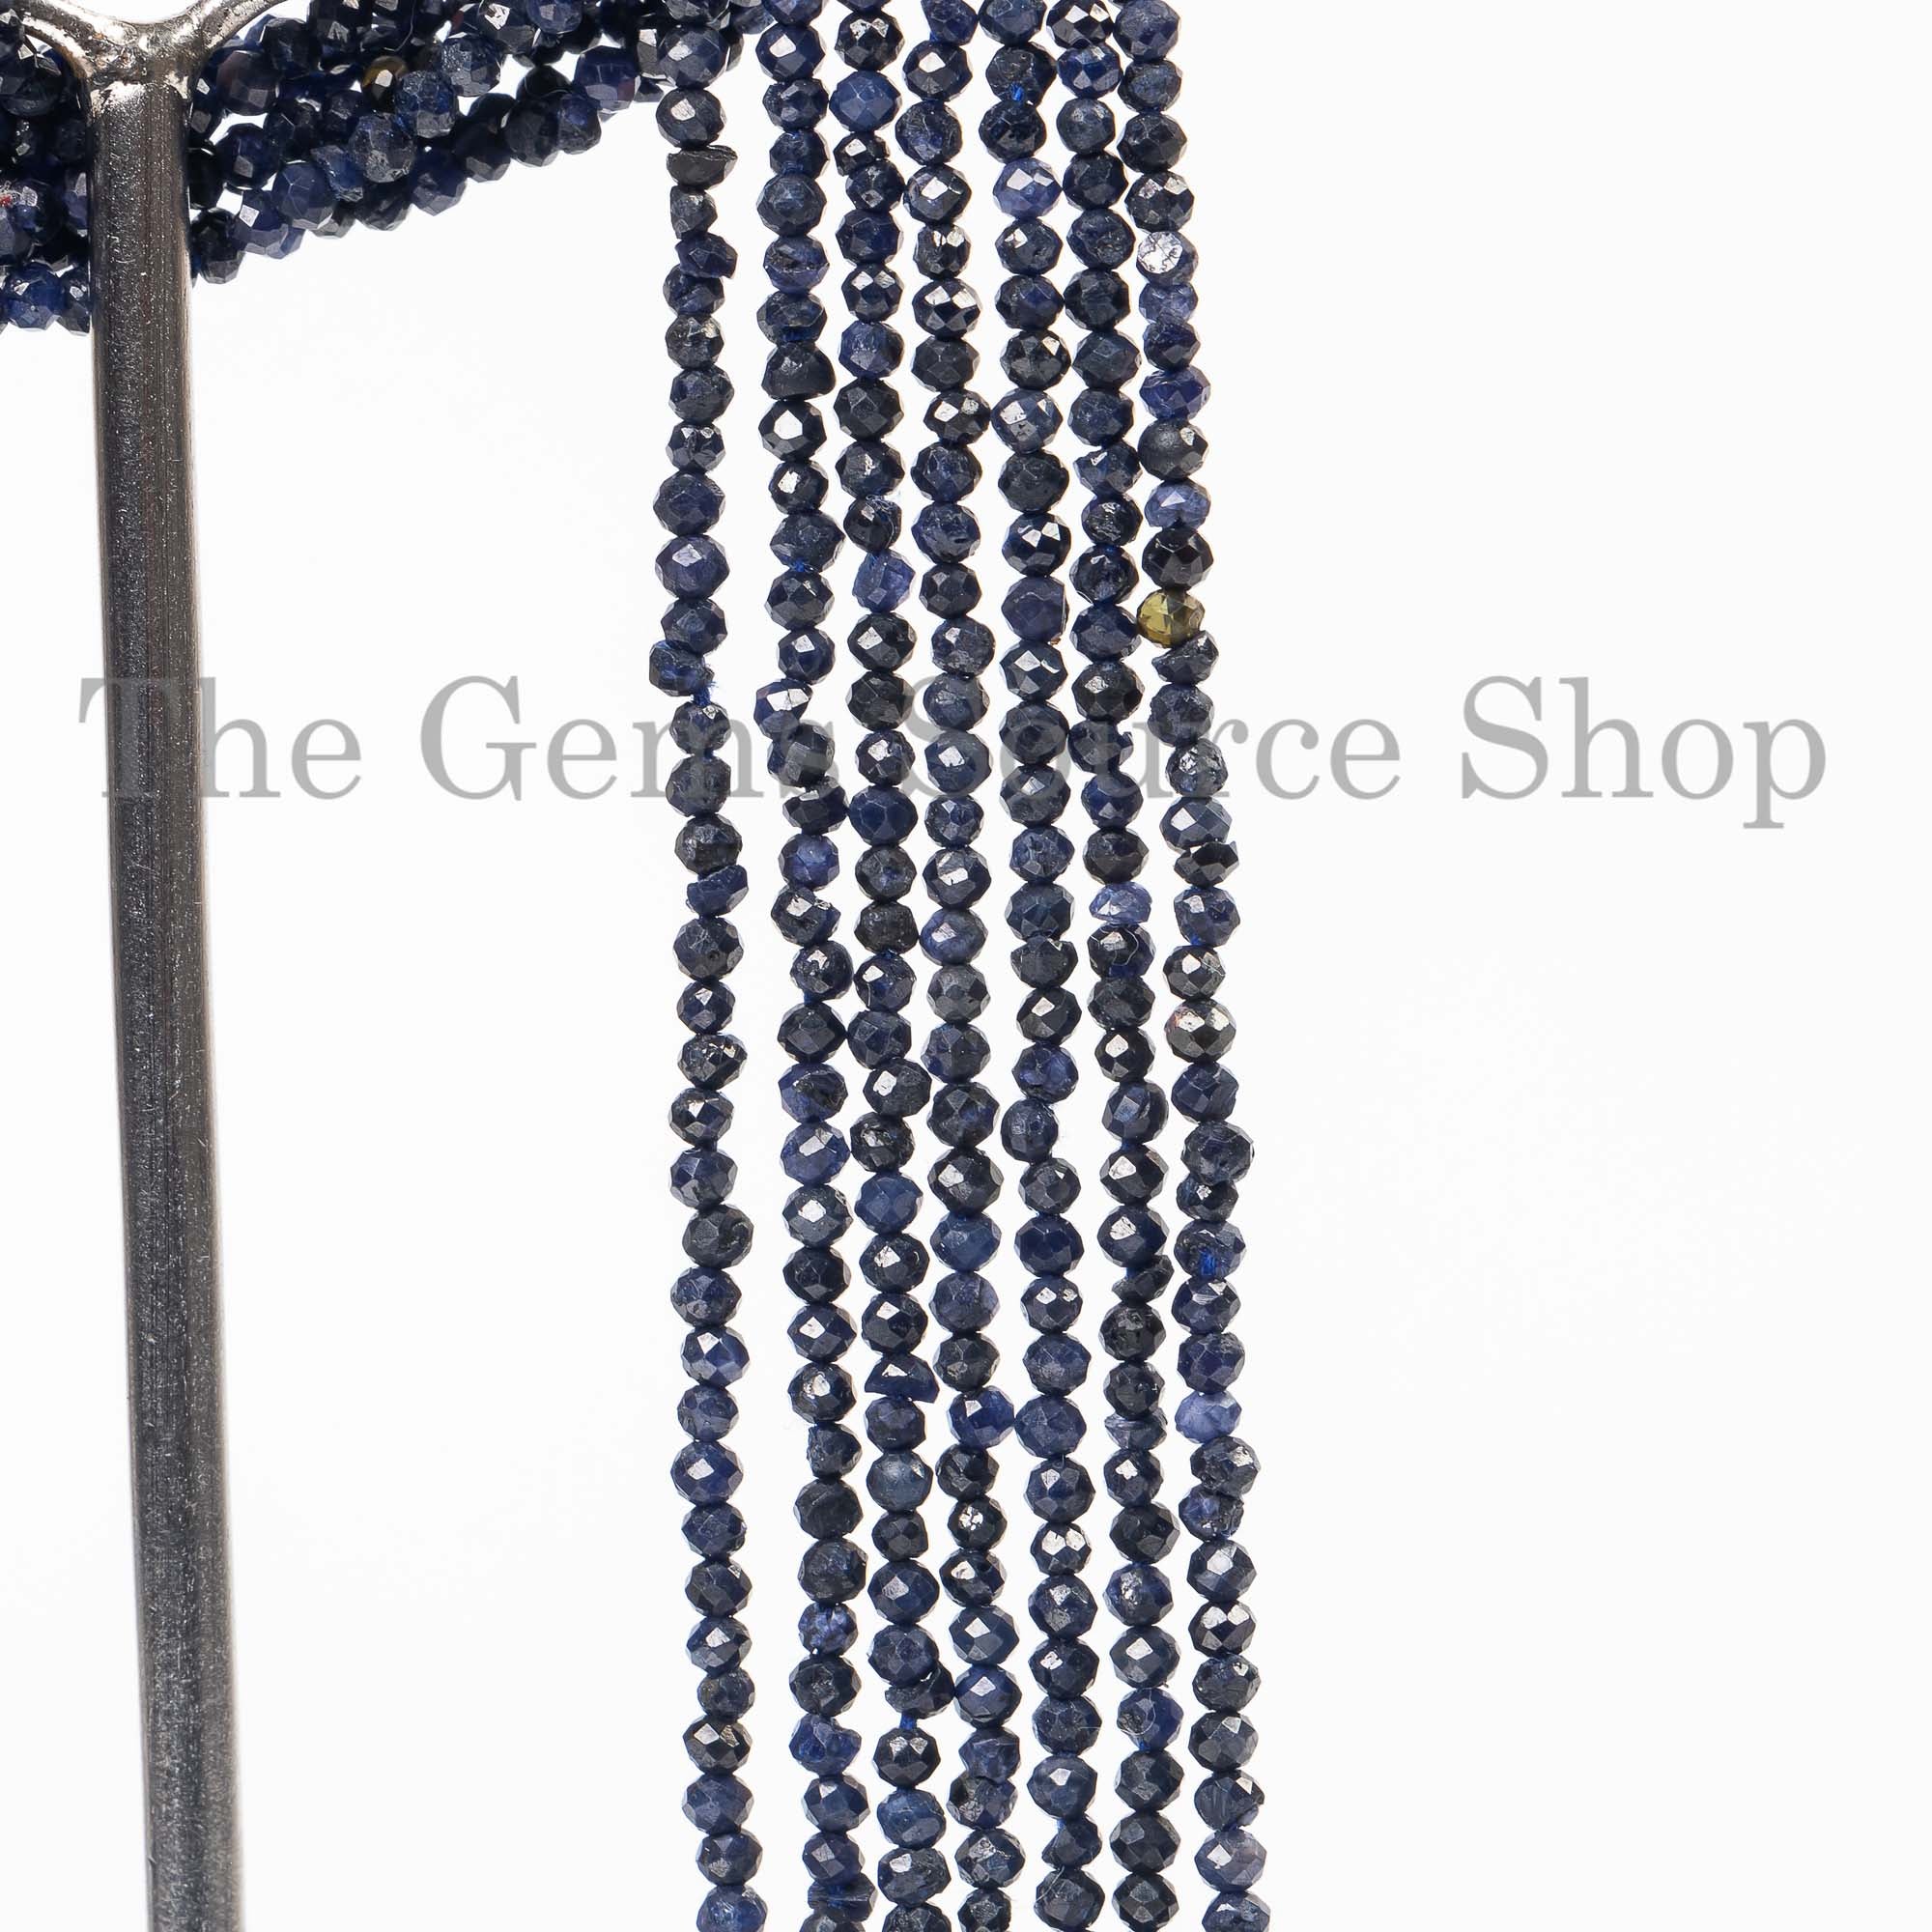 Blue Sapphire Beads, 2-2.5mm Rondelle Beads, Sapphire Faceted Beads, Sapphire Beads, Blue Sapphire Gemstone, Beads For Jewelry